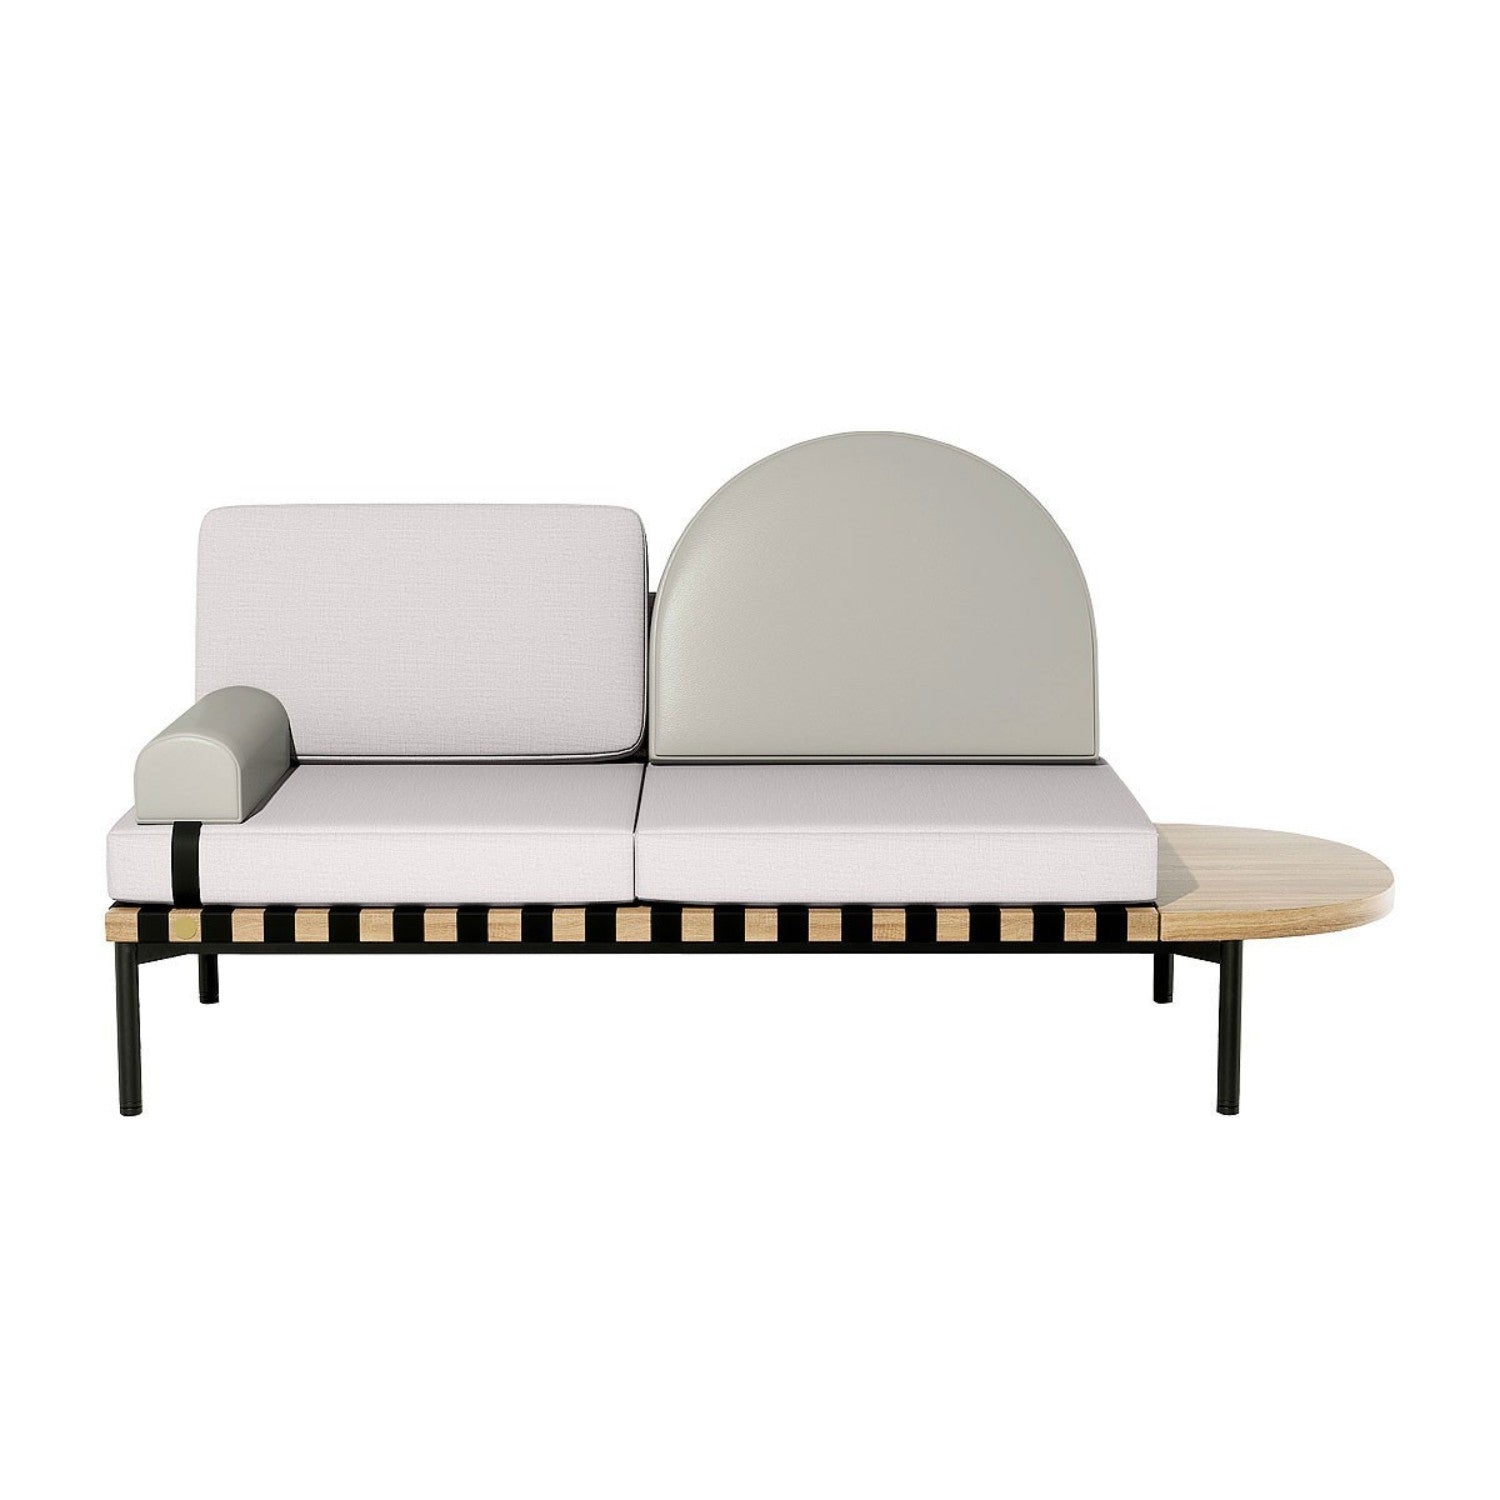 GRID - Daybed